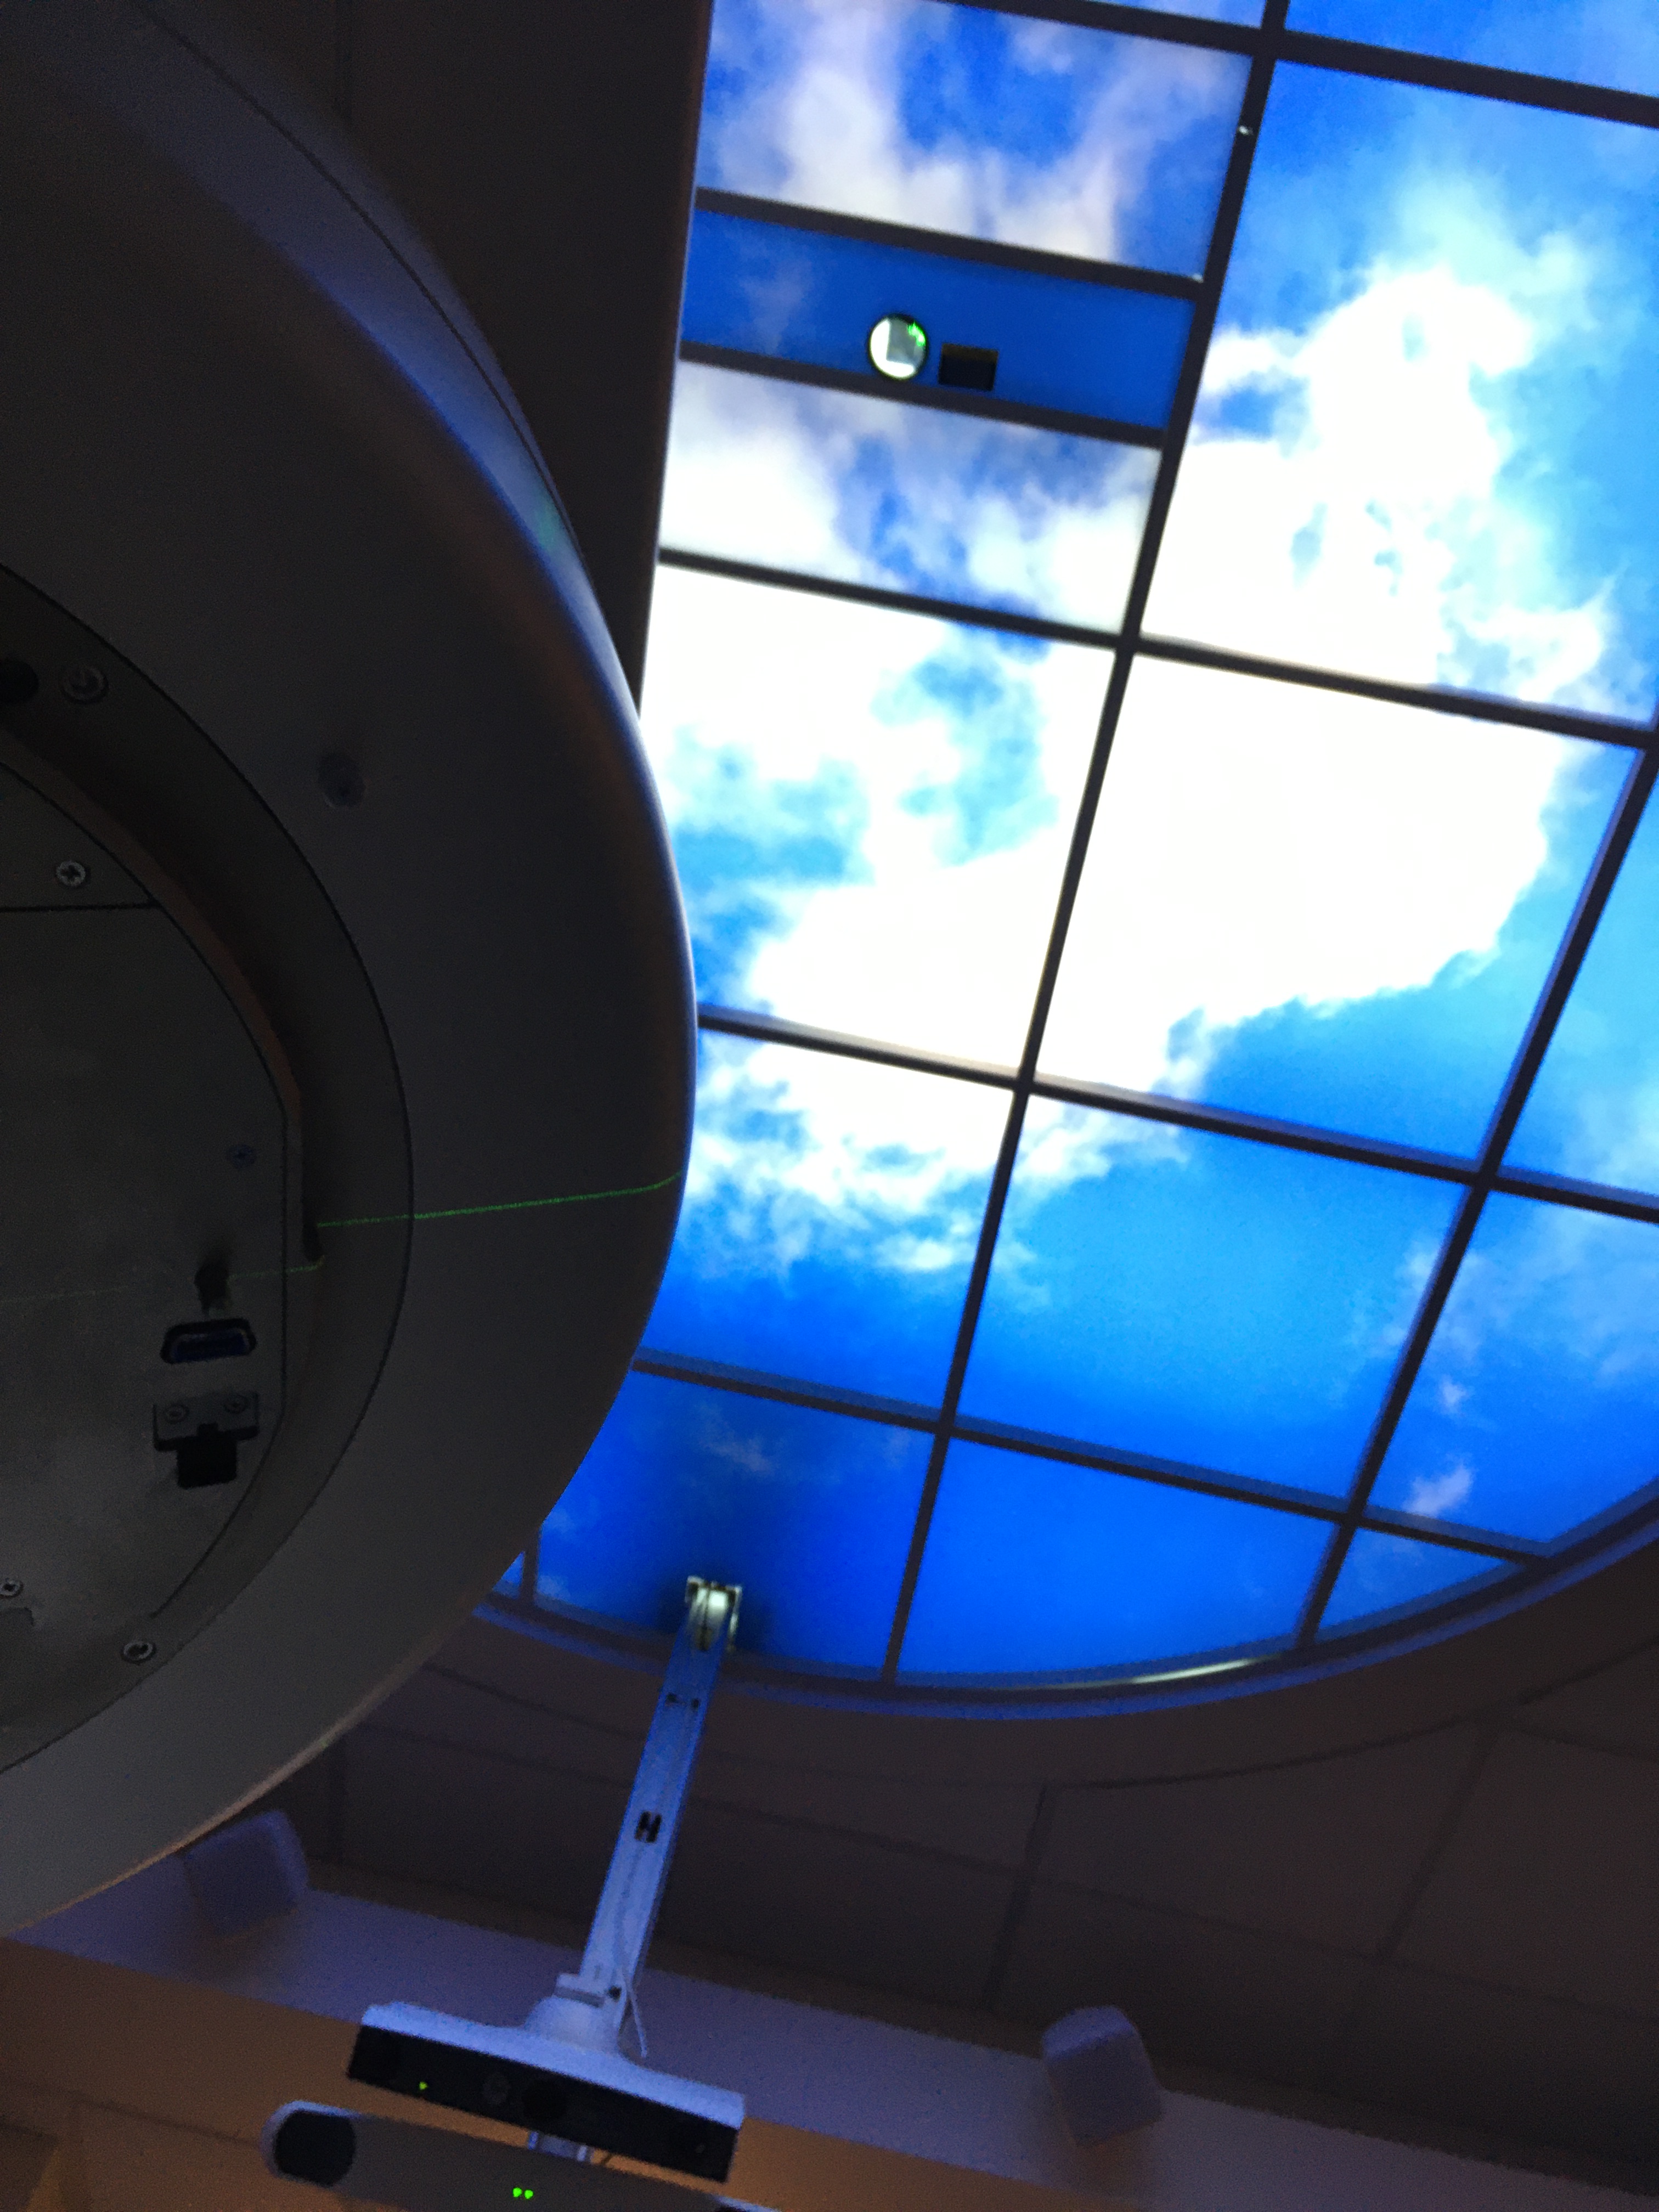 Photo of part of the radiation machine on the left, and the blue ceiling light above. It's an odd angle, taken from the view when inside the radiation machine.